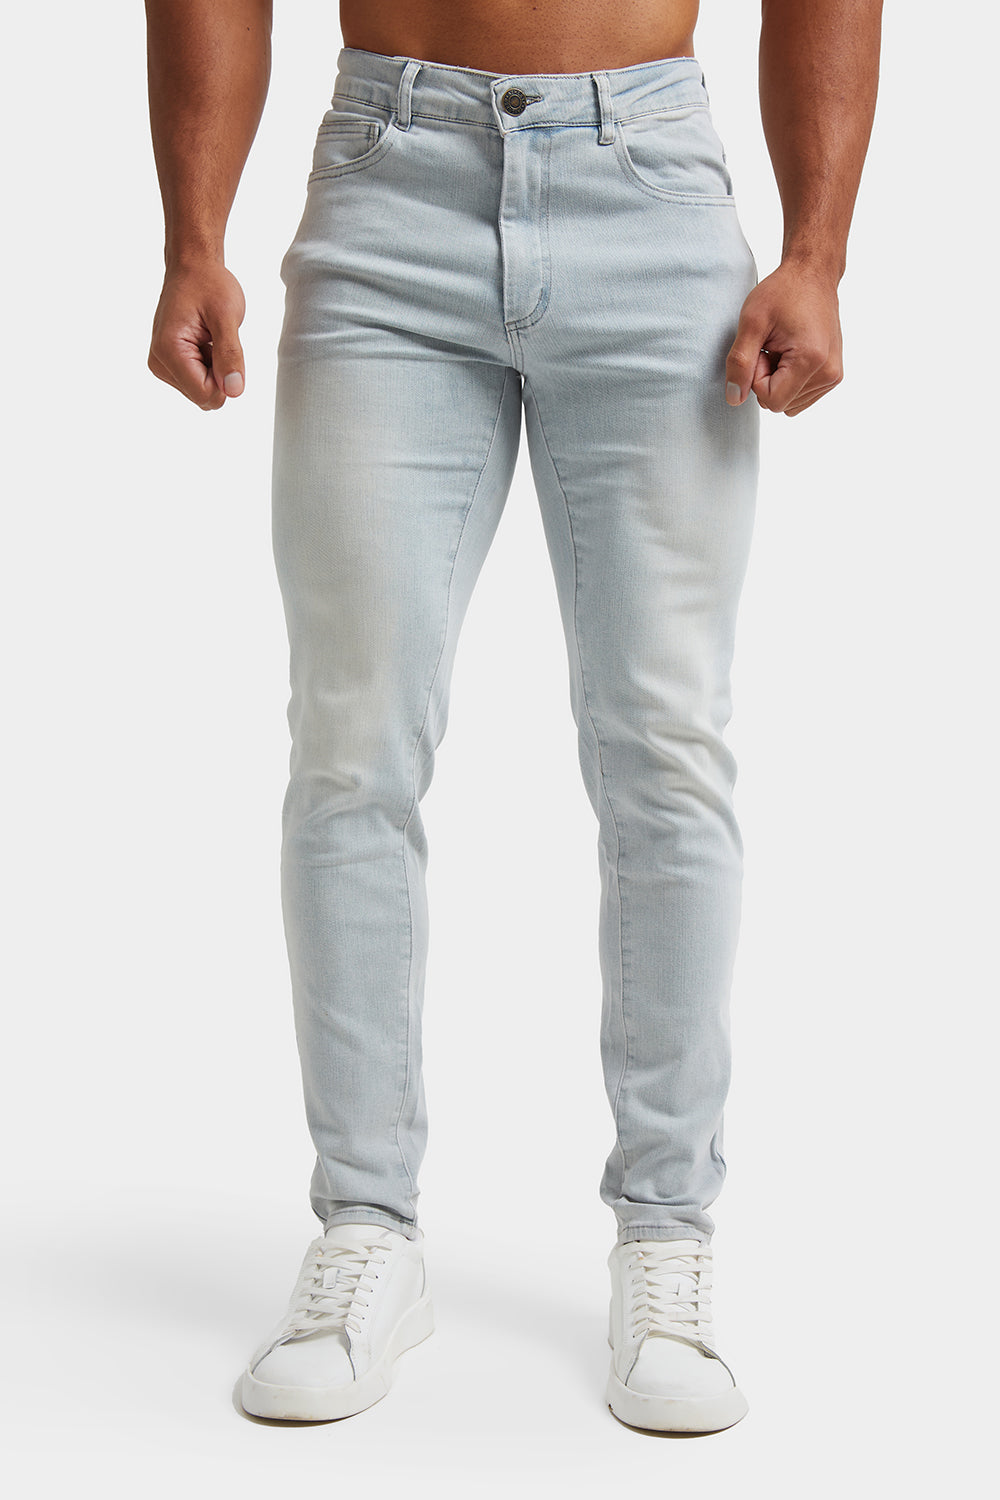 Rotek Plain Mens Sky Blue Jeans at Rs 420/piece in Ahmedabad | ID:  19522208391